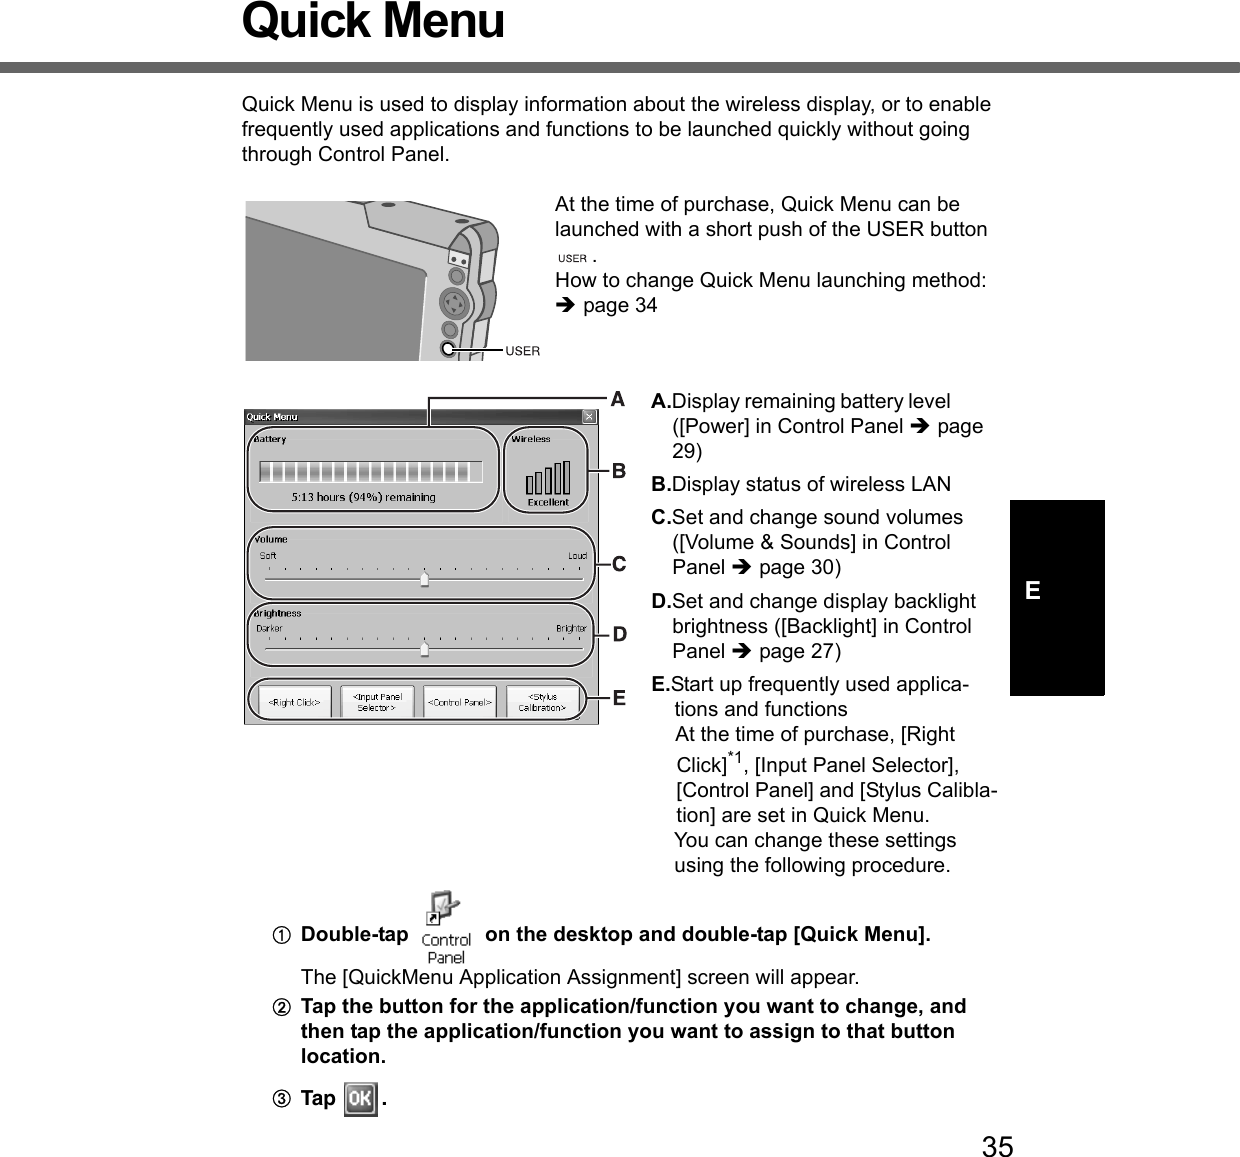 35EQuick MenuQuick Menu is used to display information about the wireless display, or to enable frequently used applications and functions to be launched quickly without going through Control Panel. At the time of purchase, Quick Menu can be launched with a short push of the USER button .How to change Quick Menu launching method: Îpage 34A.Display remaining battery level ([Power] in Control Panel Îpage 29)B.Display status of wireless LANC.Set and change sound volumes ([Volume &amp; Sounds] in Control Panel Îpage 30)D.Set and change display backlight brightness ([Backlight] in Control Panel Îpage 27)E.Start up frequently used applica-tions and functionsAt the time of purchase, [Right Click]*1, [Input Panel Selector], [Control Panel] and [Stylus Calibla-tion] are set in Quick Menu. You can change these settings using the following procedure. ADouble-tap   on the desktop and double-tap [Quick Menu]. The [QuickMenu Application Assignment] screen will appear.BTap the button for the application/function you want to change, and then tap the application/function you want to assign to that button location. CTap .